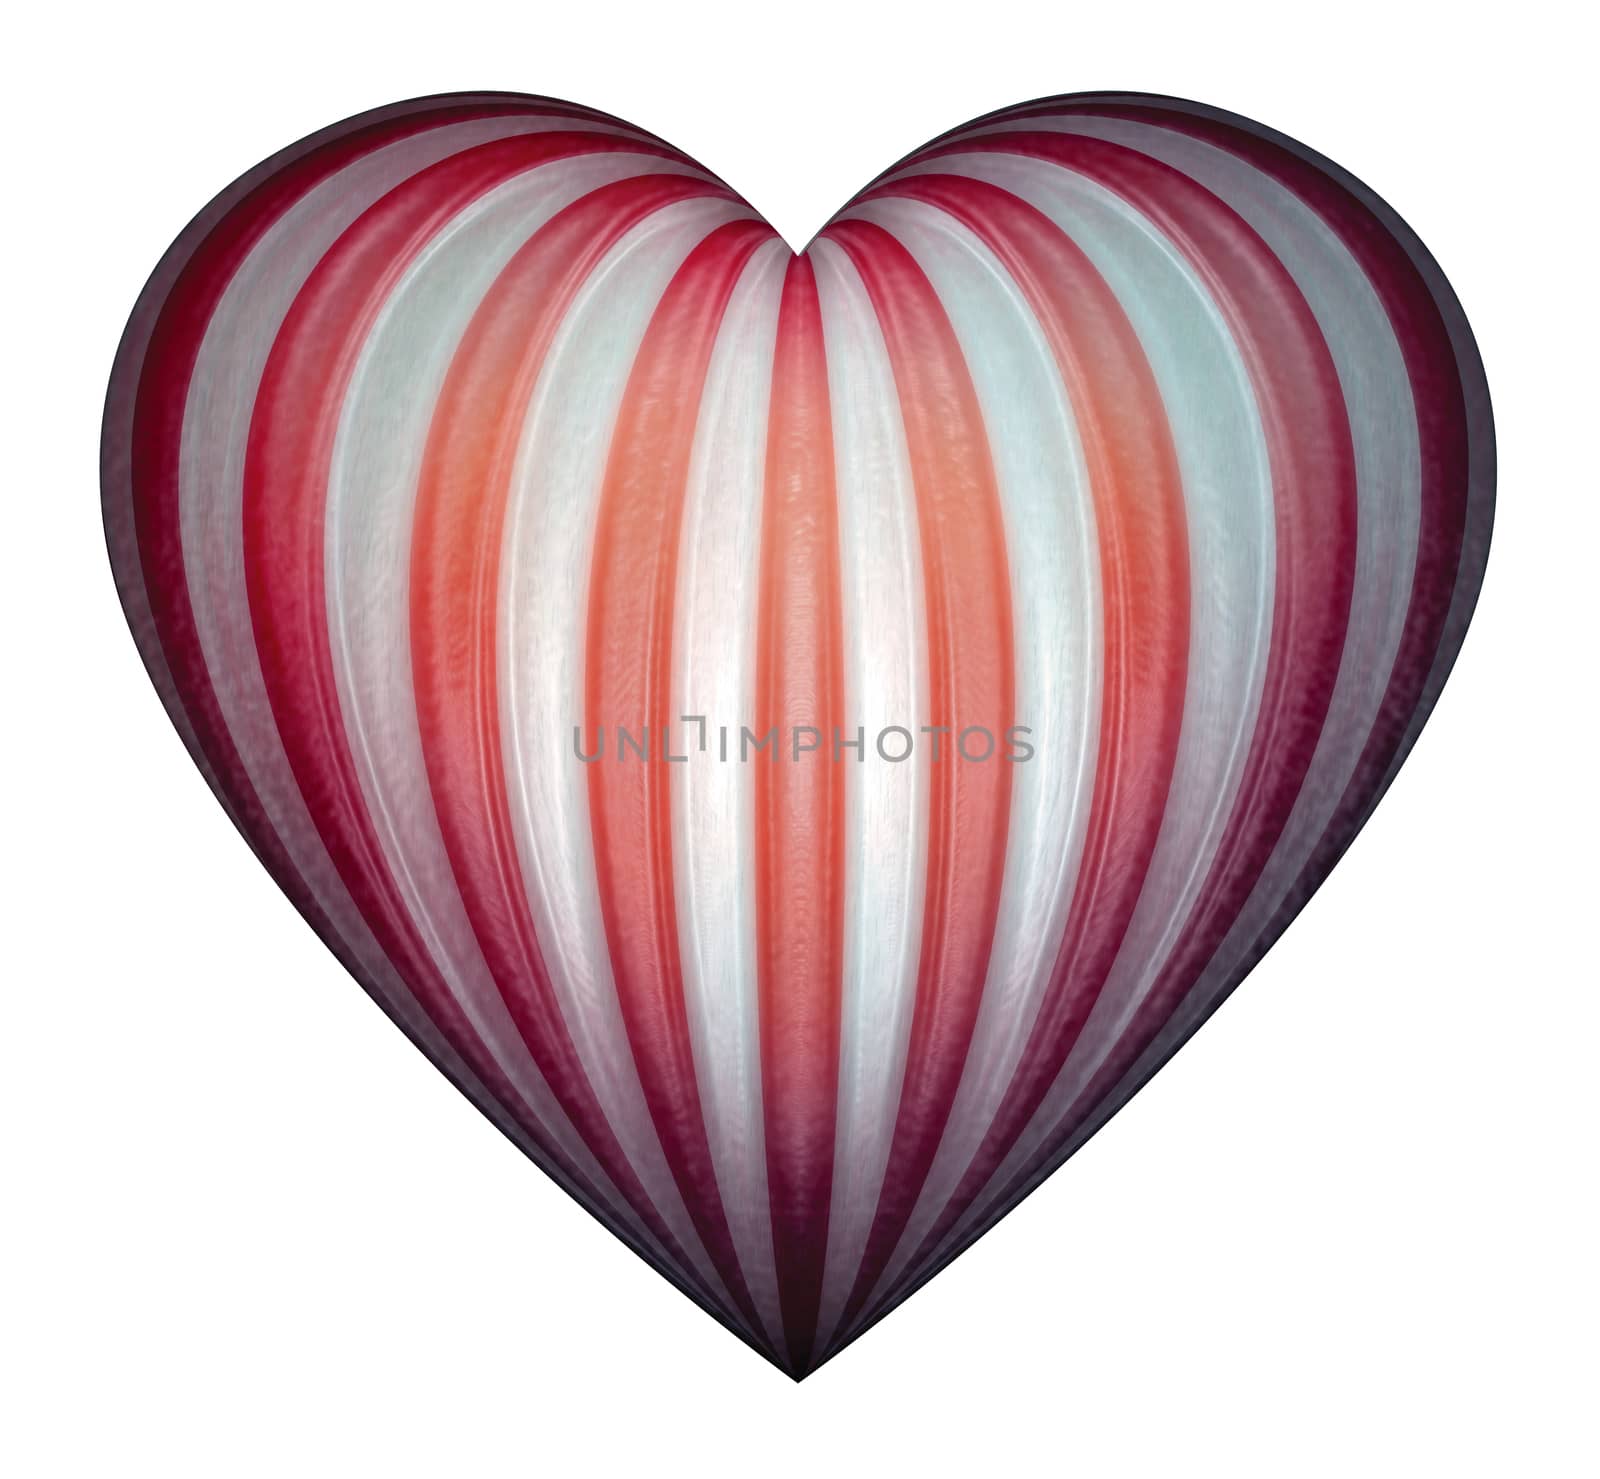 Digital illustration of a heart shaped candy cane.